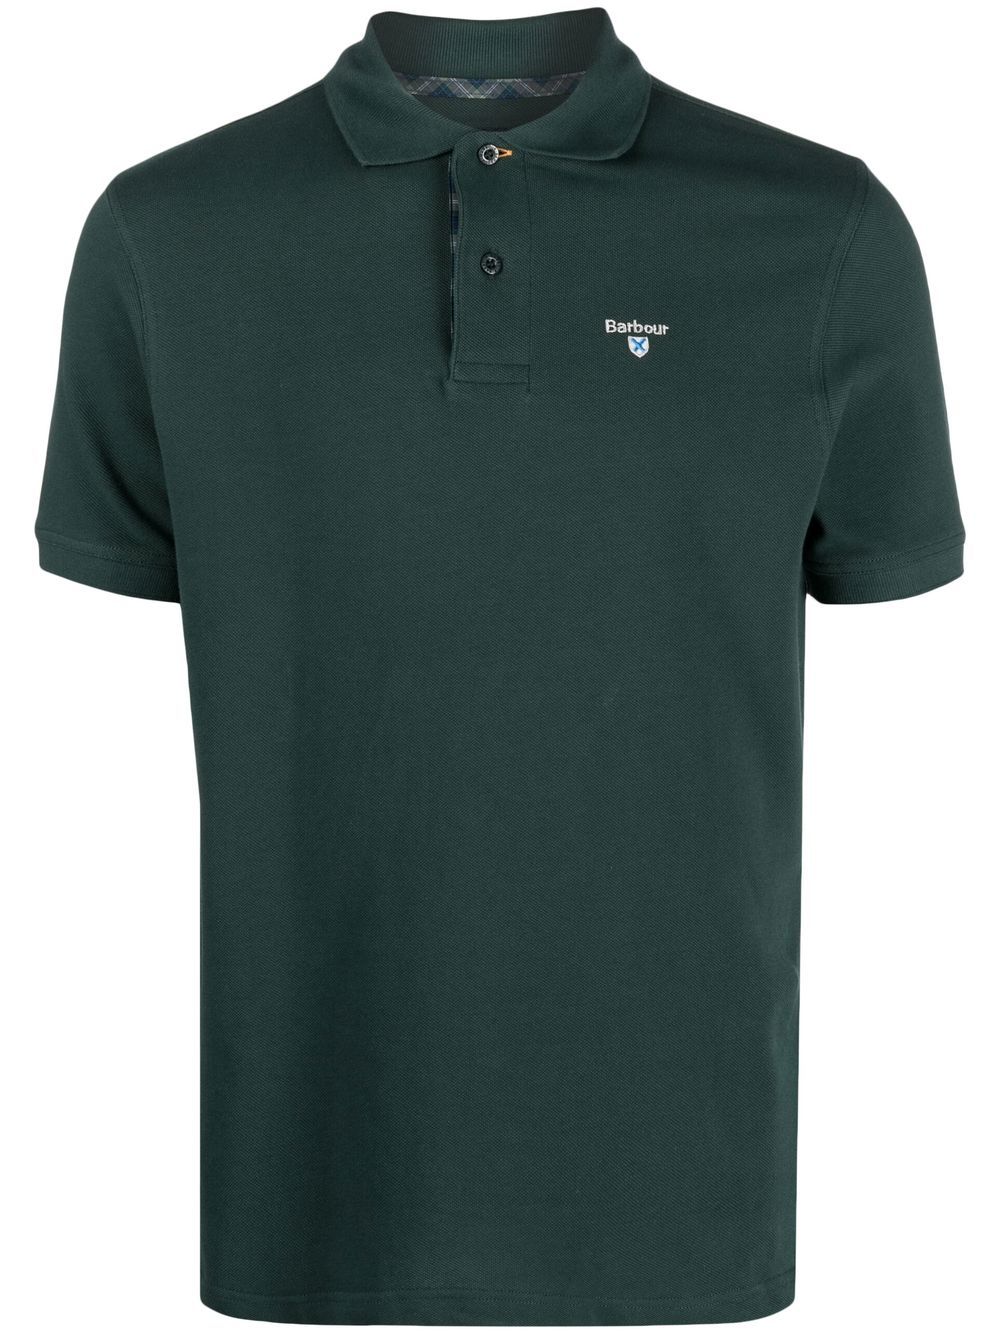 Barbour embroidered-logo polo shirt - Green von Barbour